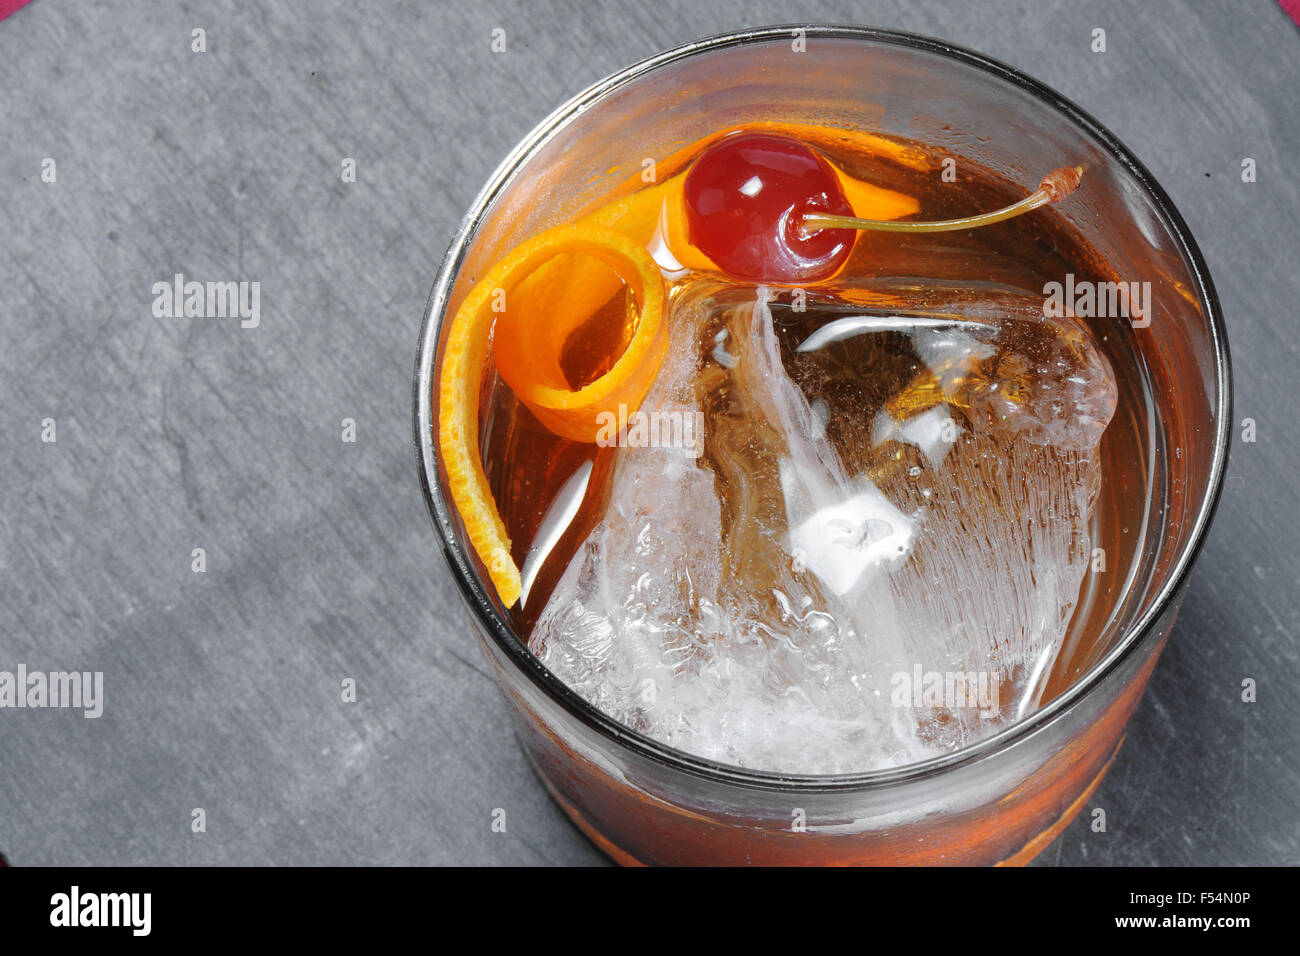 A glass of gin with ice, orange peel and a cherry. Stock Photo